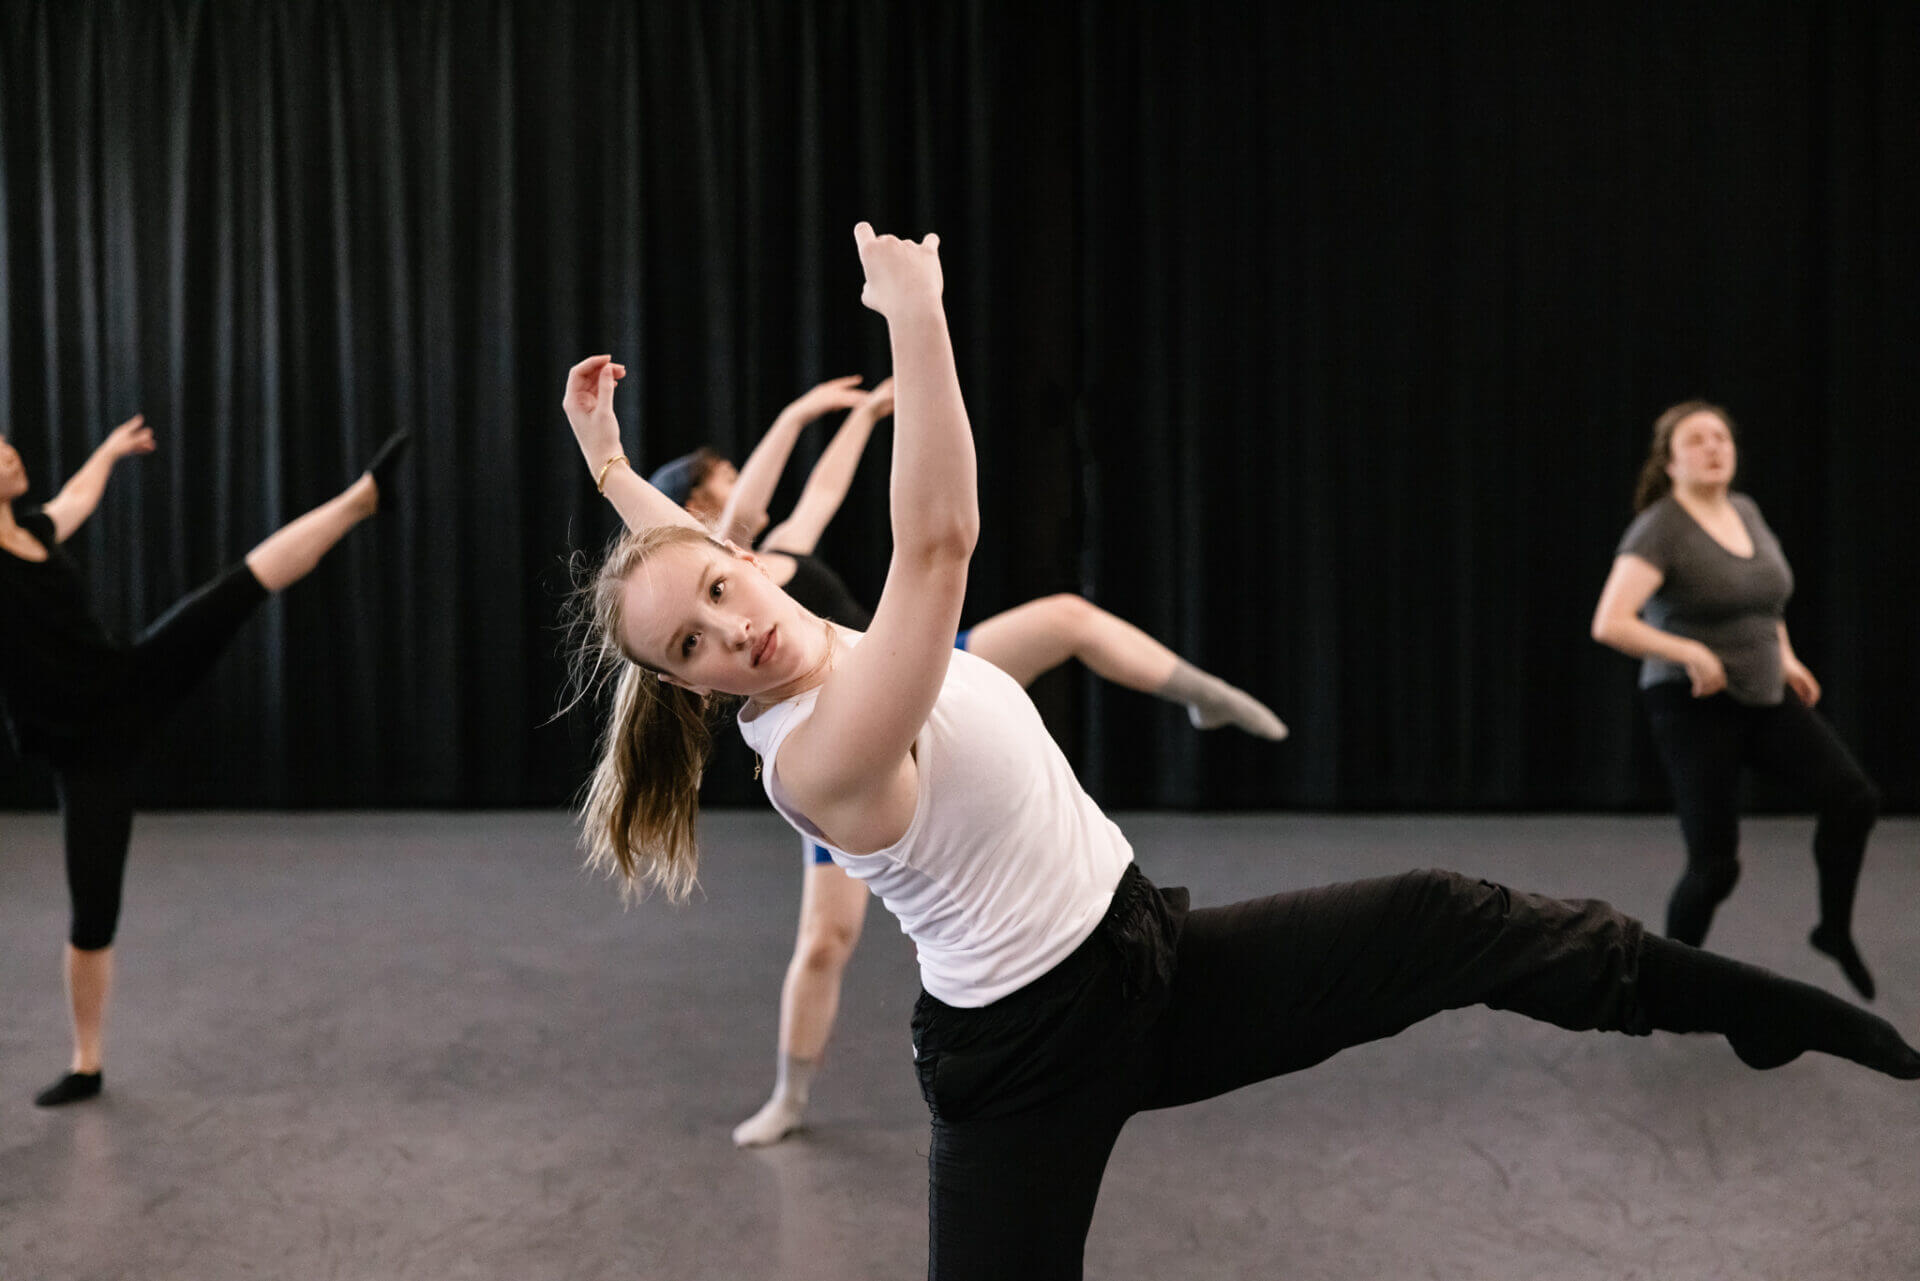 Young dancer in the studio leaning to their right with arms extended upwards and left leg lifted at a 90 degree angle with a bent knee and pointed toe.